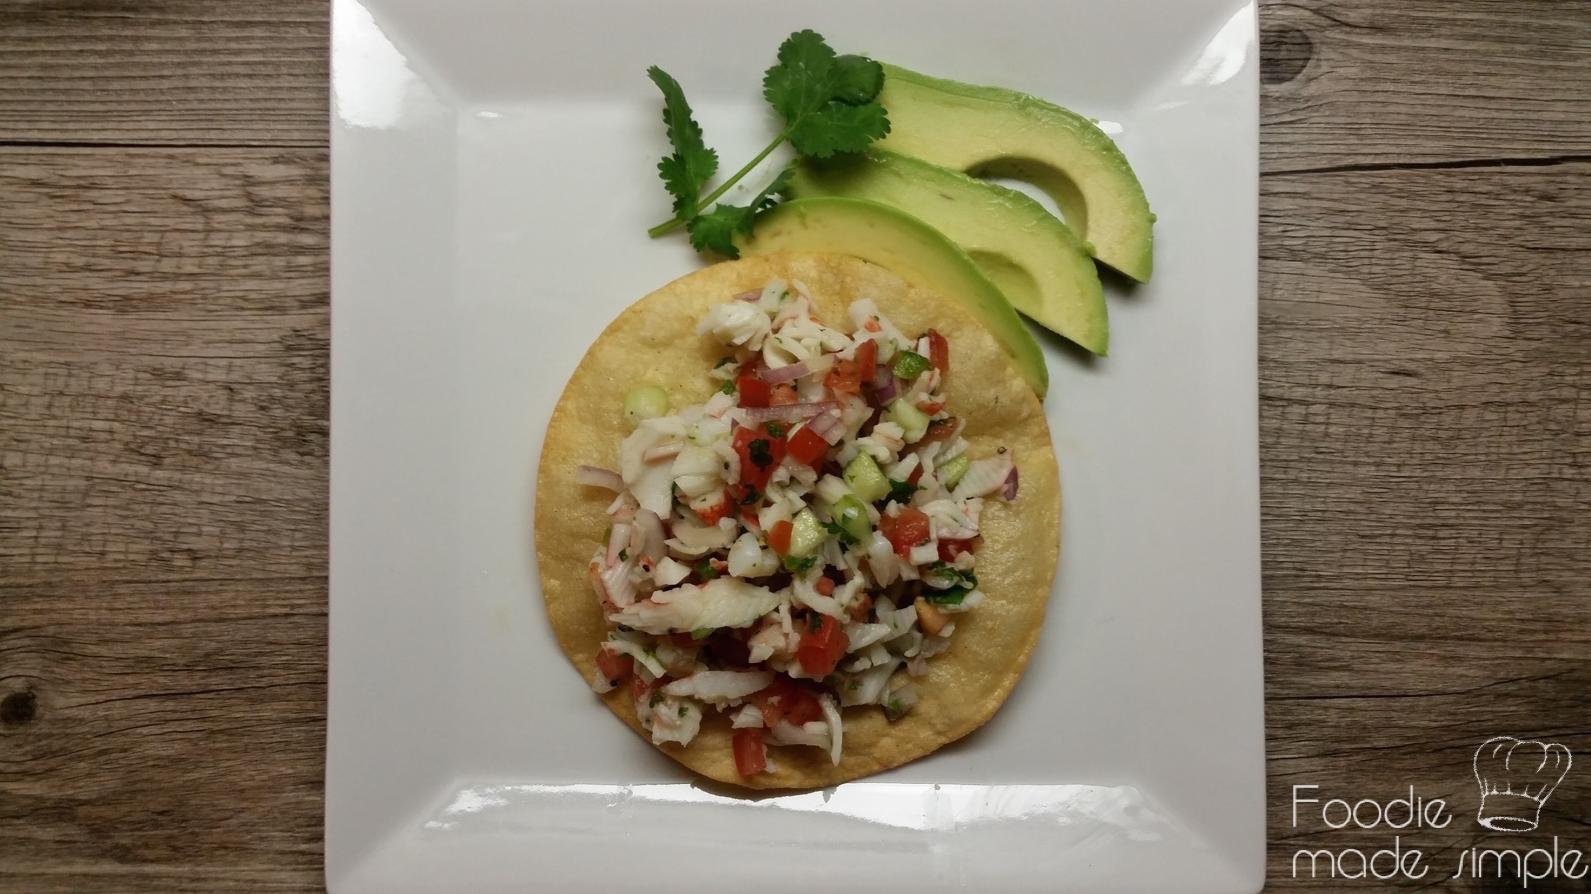  A mouth-watering combination of seafood and tortillas.